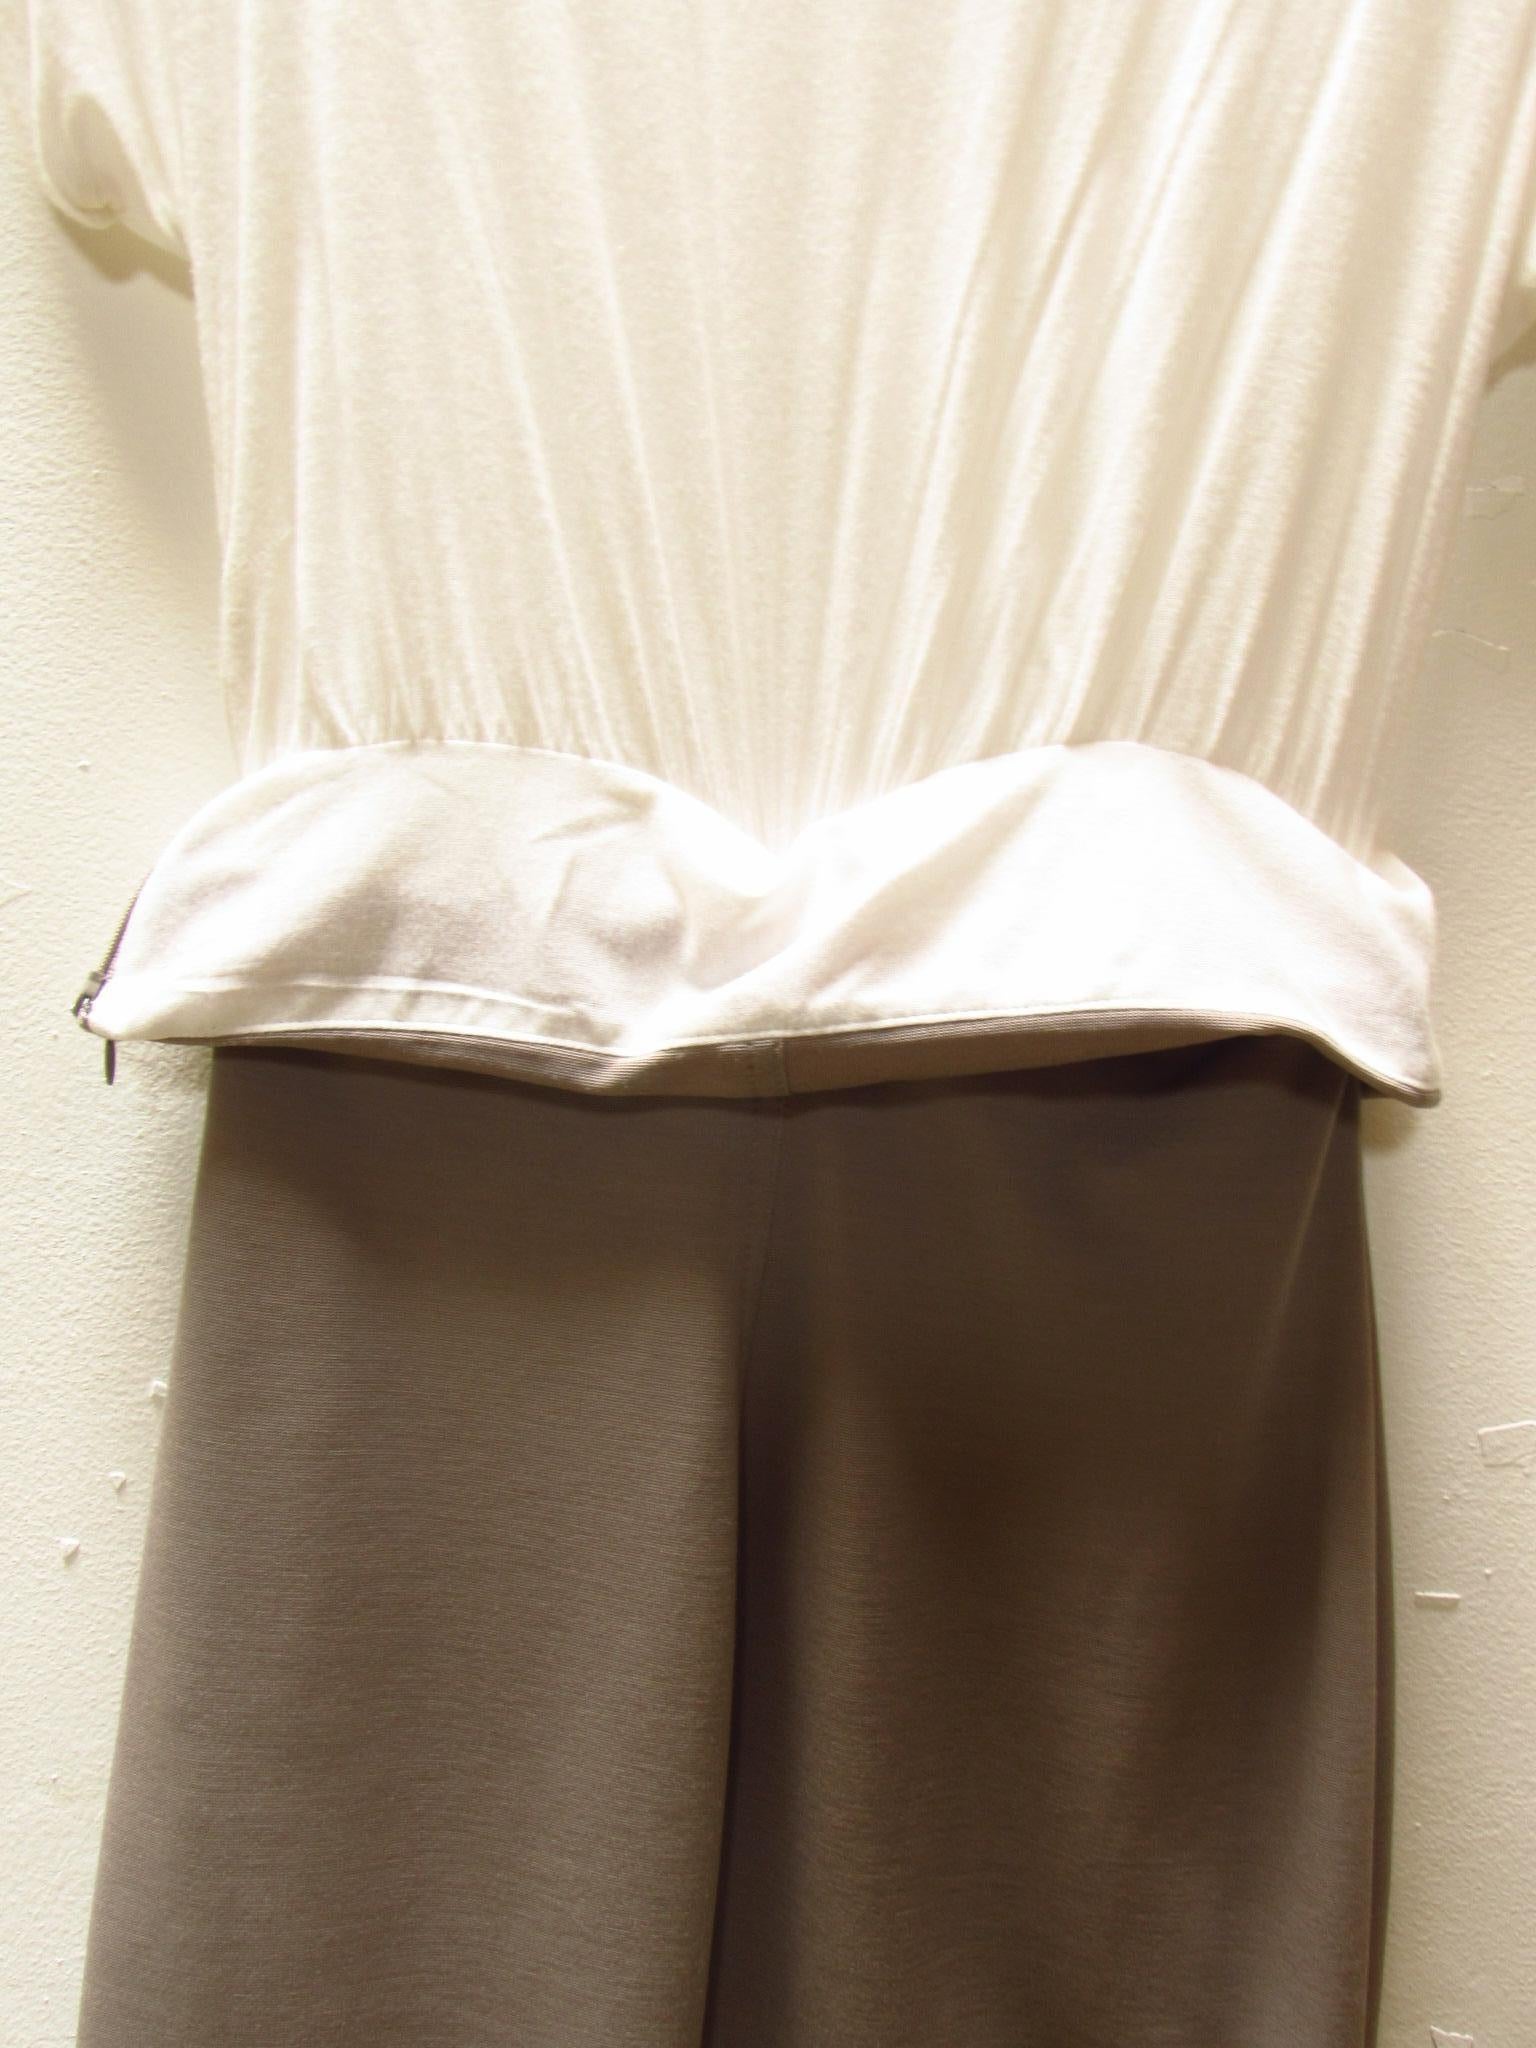 Hussein Chalayan 2 Tone Dress In New Condition For Sale In Laguna Beach, CA